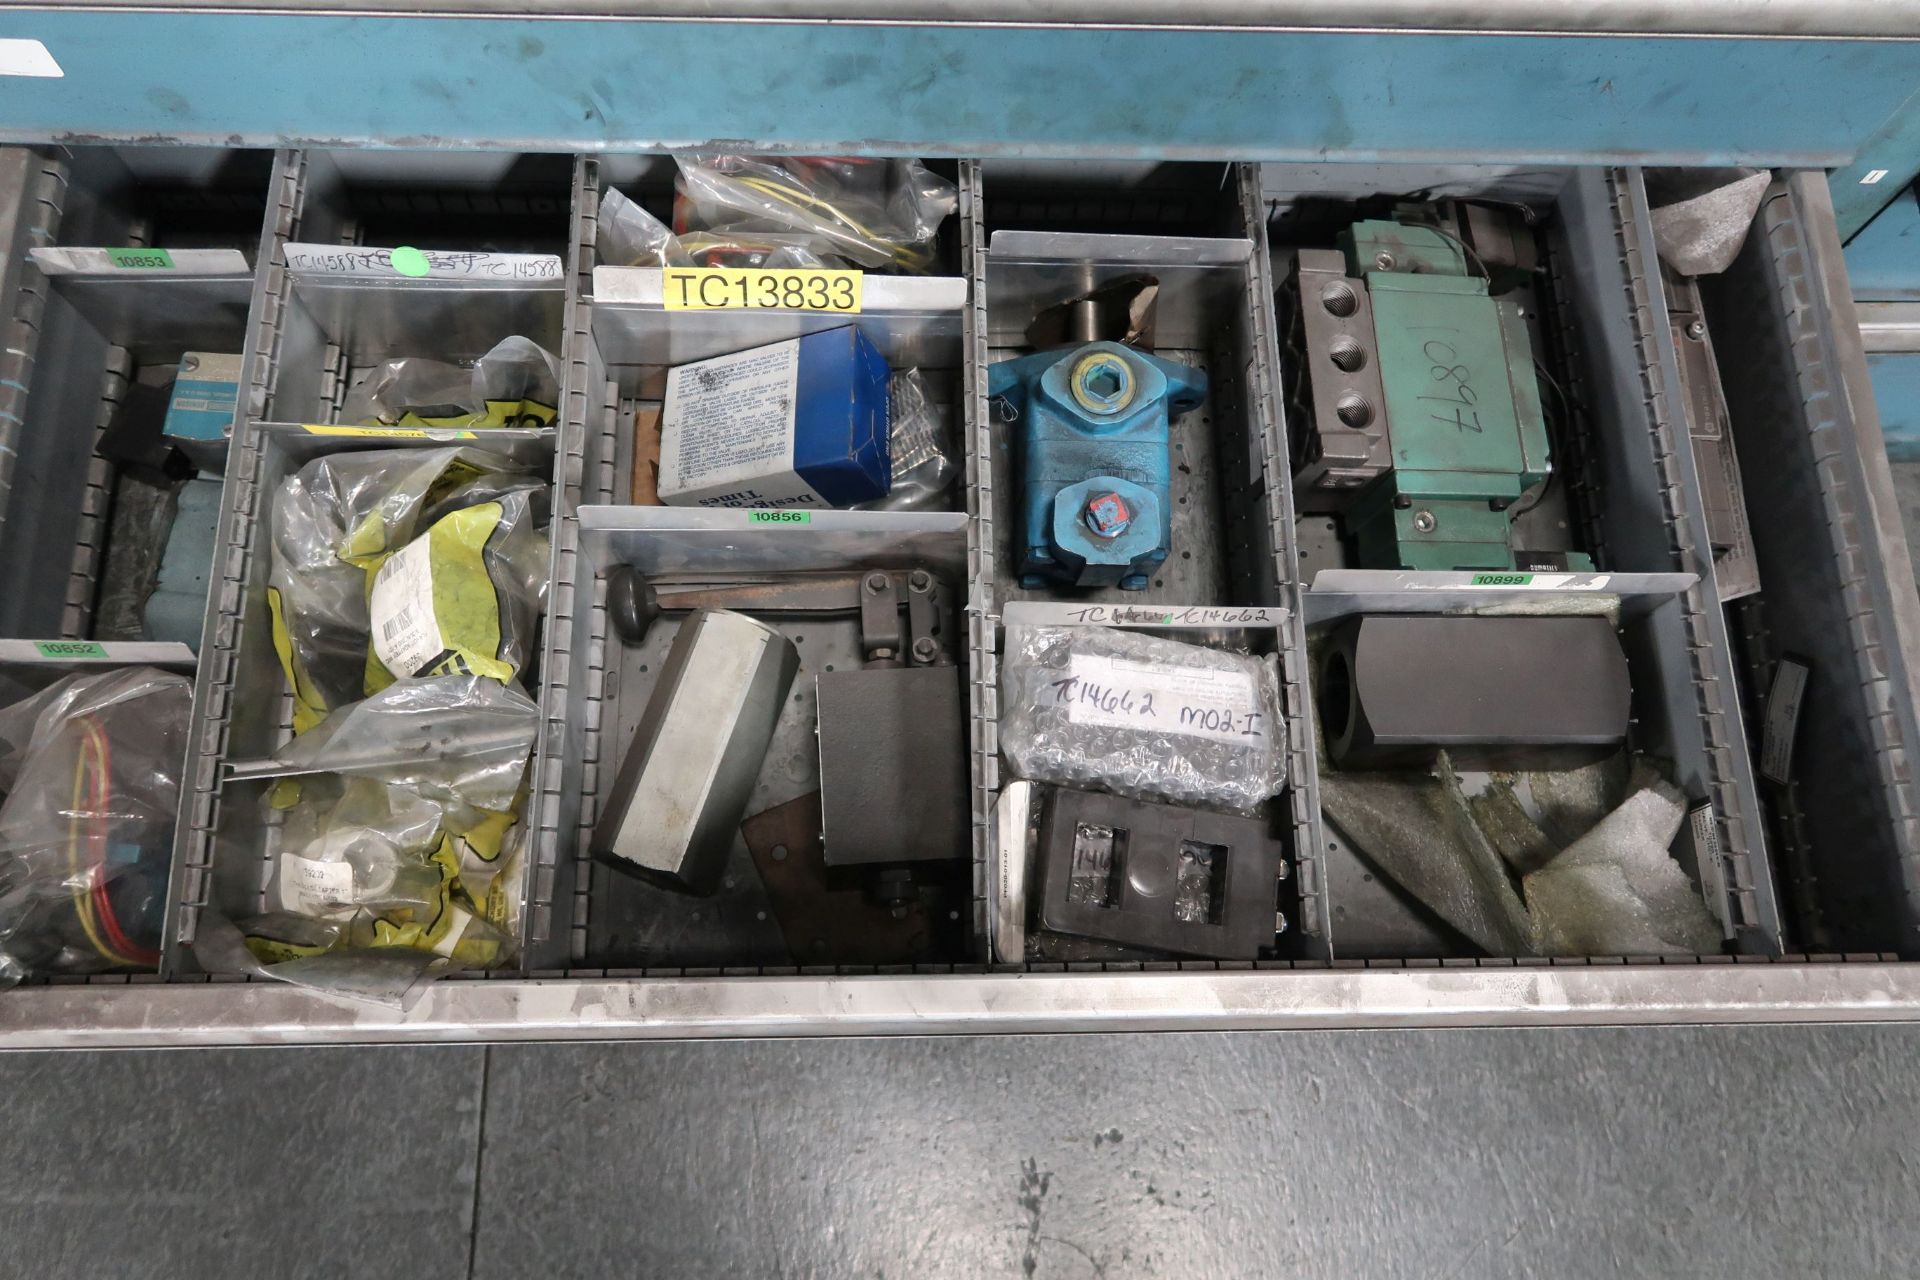 TOOLING CABINETS WITH CONTENTS - MOSTLY MACHINE PARTS **LOADING PRICE DUE TO ERRA - $2,000.00** - Image 13 of 59